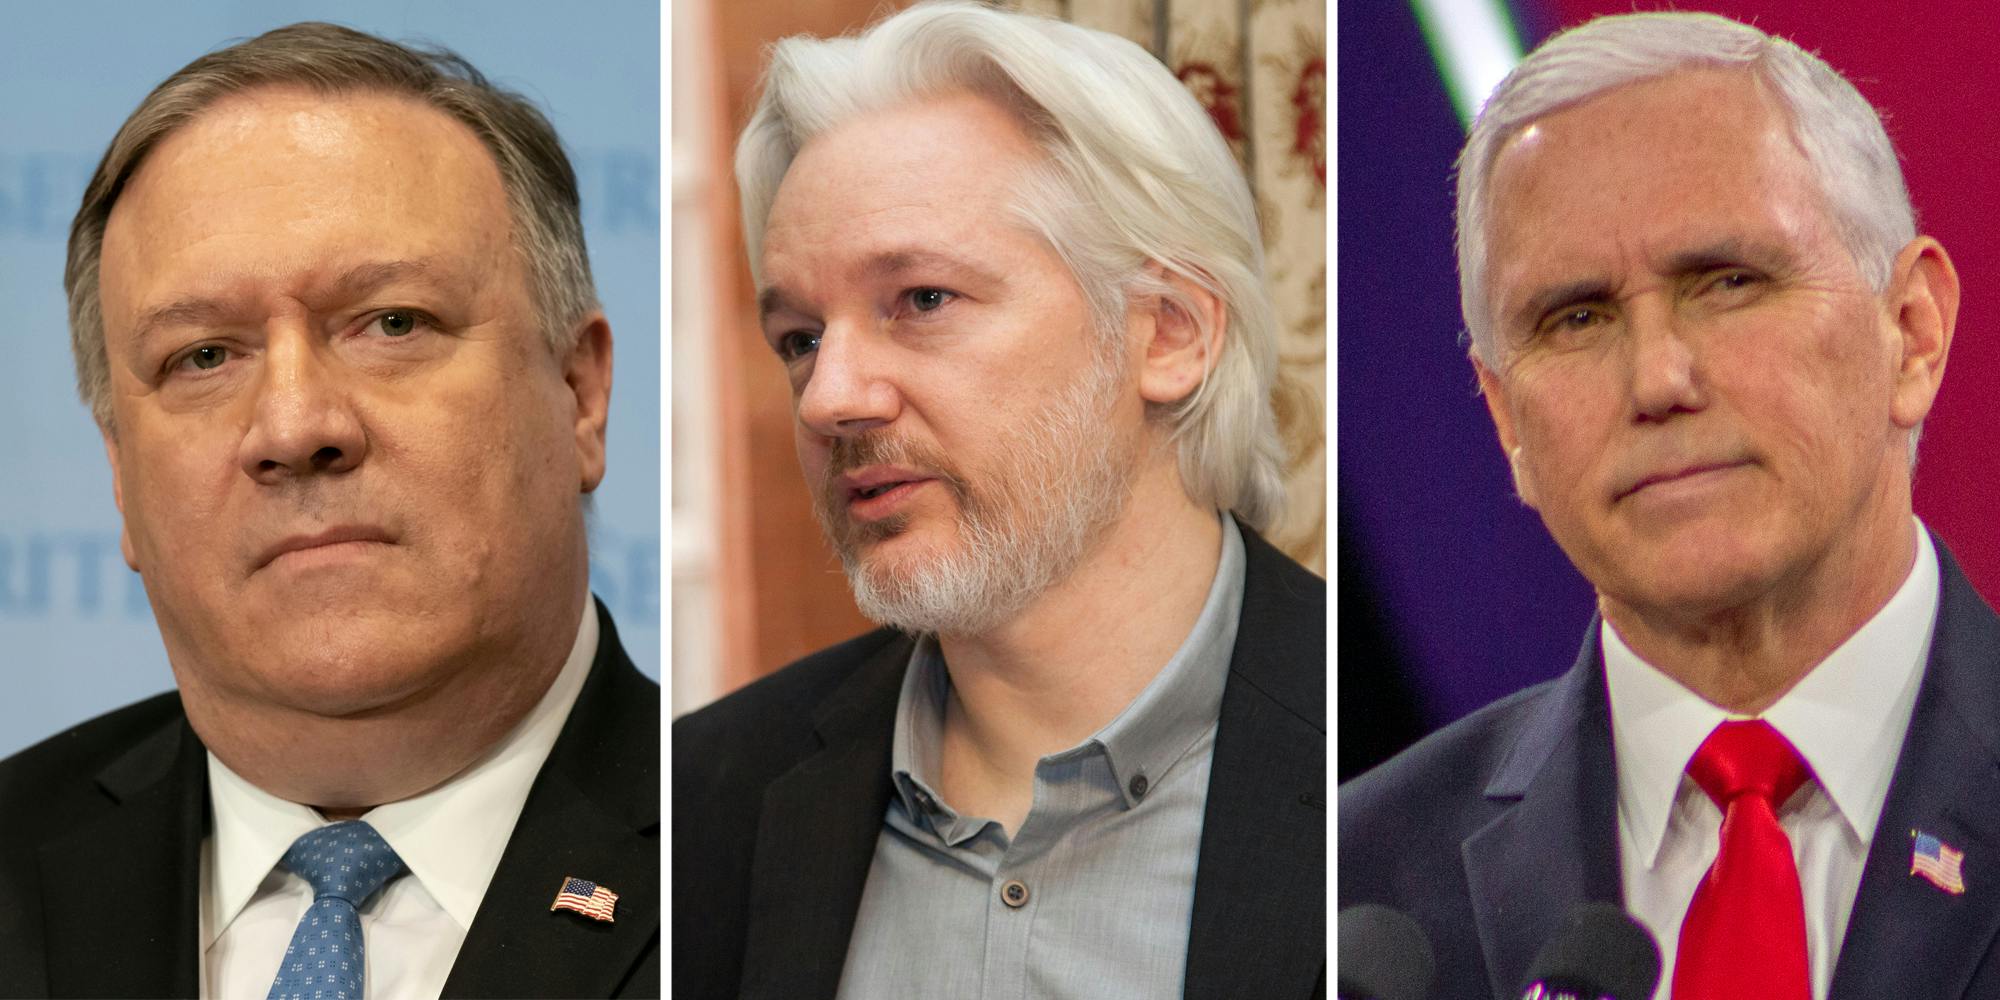 Julian Assange is free—now his proponents want former Trump officials in jail